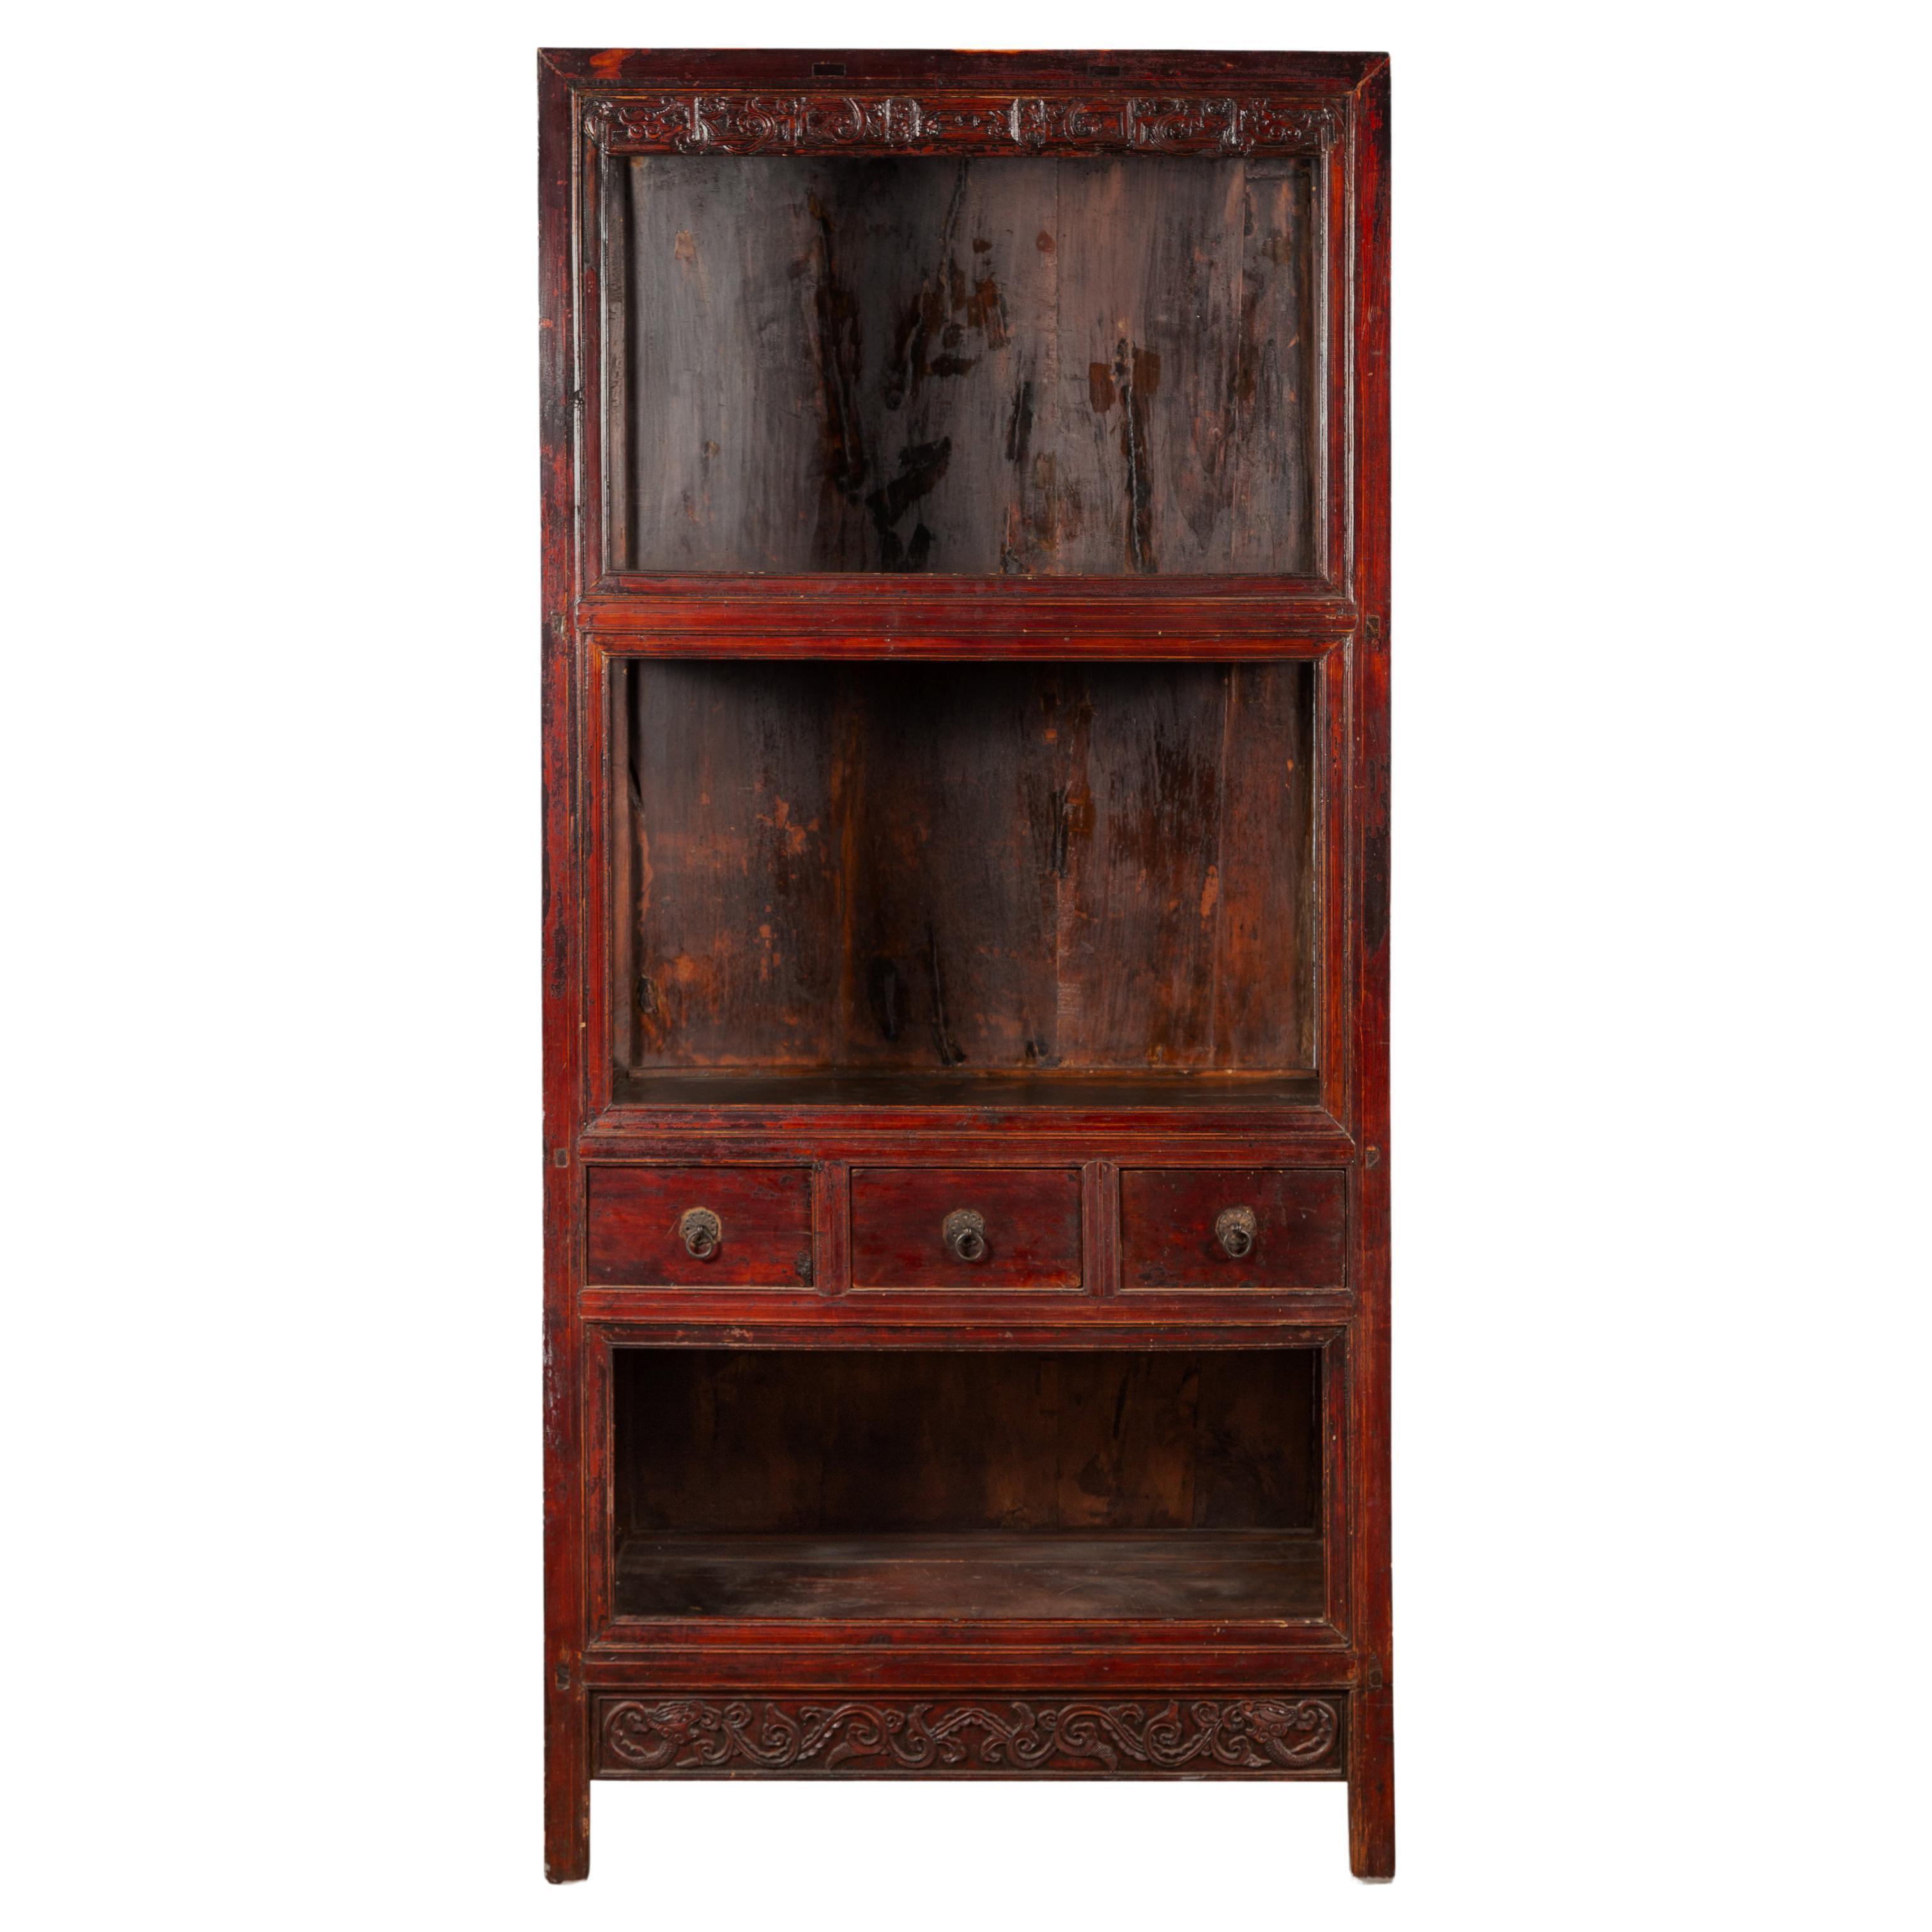 Chinese Qing Dynasty 19th Century Lacquered Cabinet with Carved Dragon Motifs